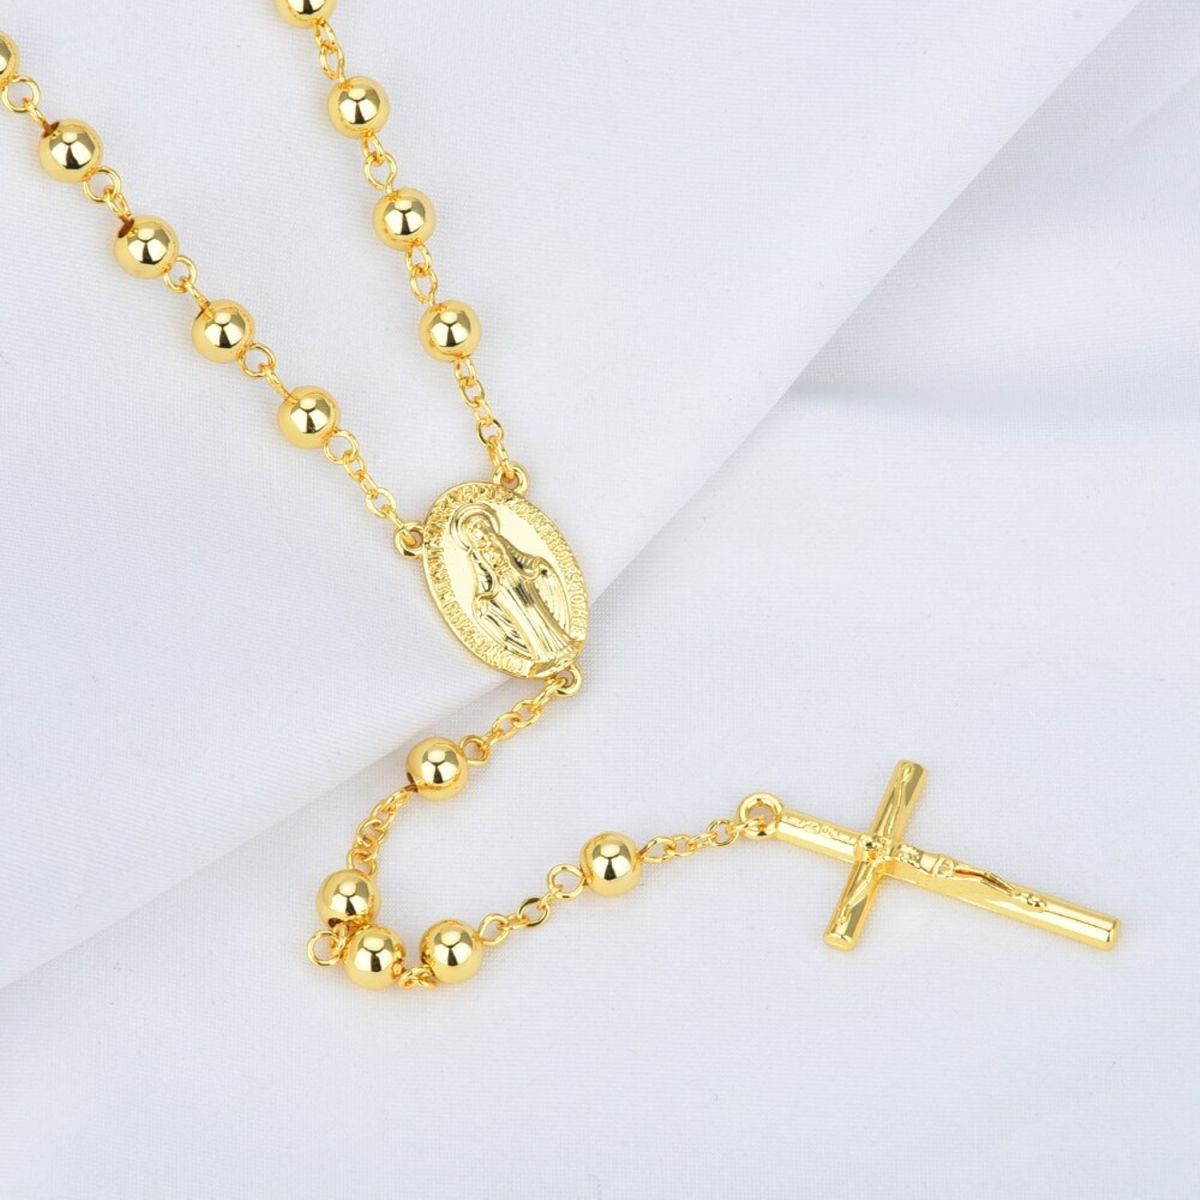 Buy Catholic Rosary Necklace Gold Cross Necklace Rosaries Gold Rosary  Necklace, Cross, Gold Plated Crucifix Cross Pendant, Rosary, Rosario Online  in India - Etsy